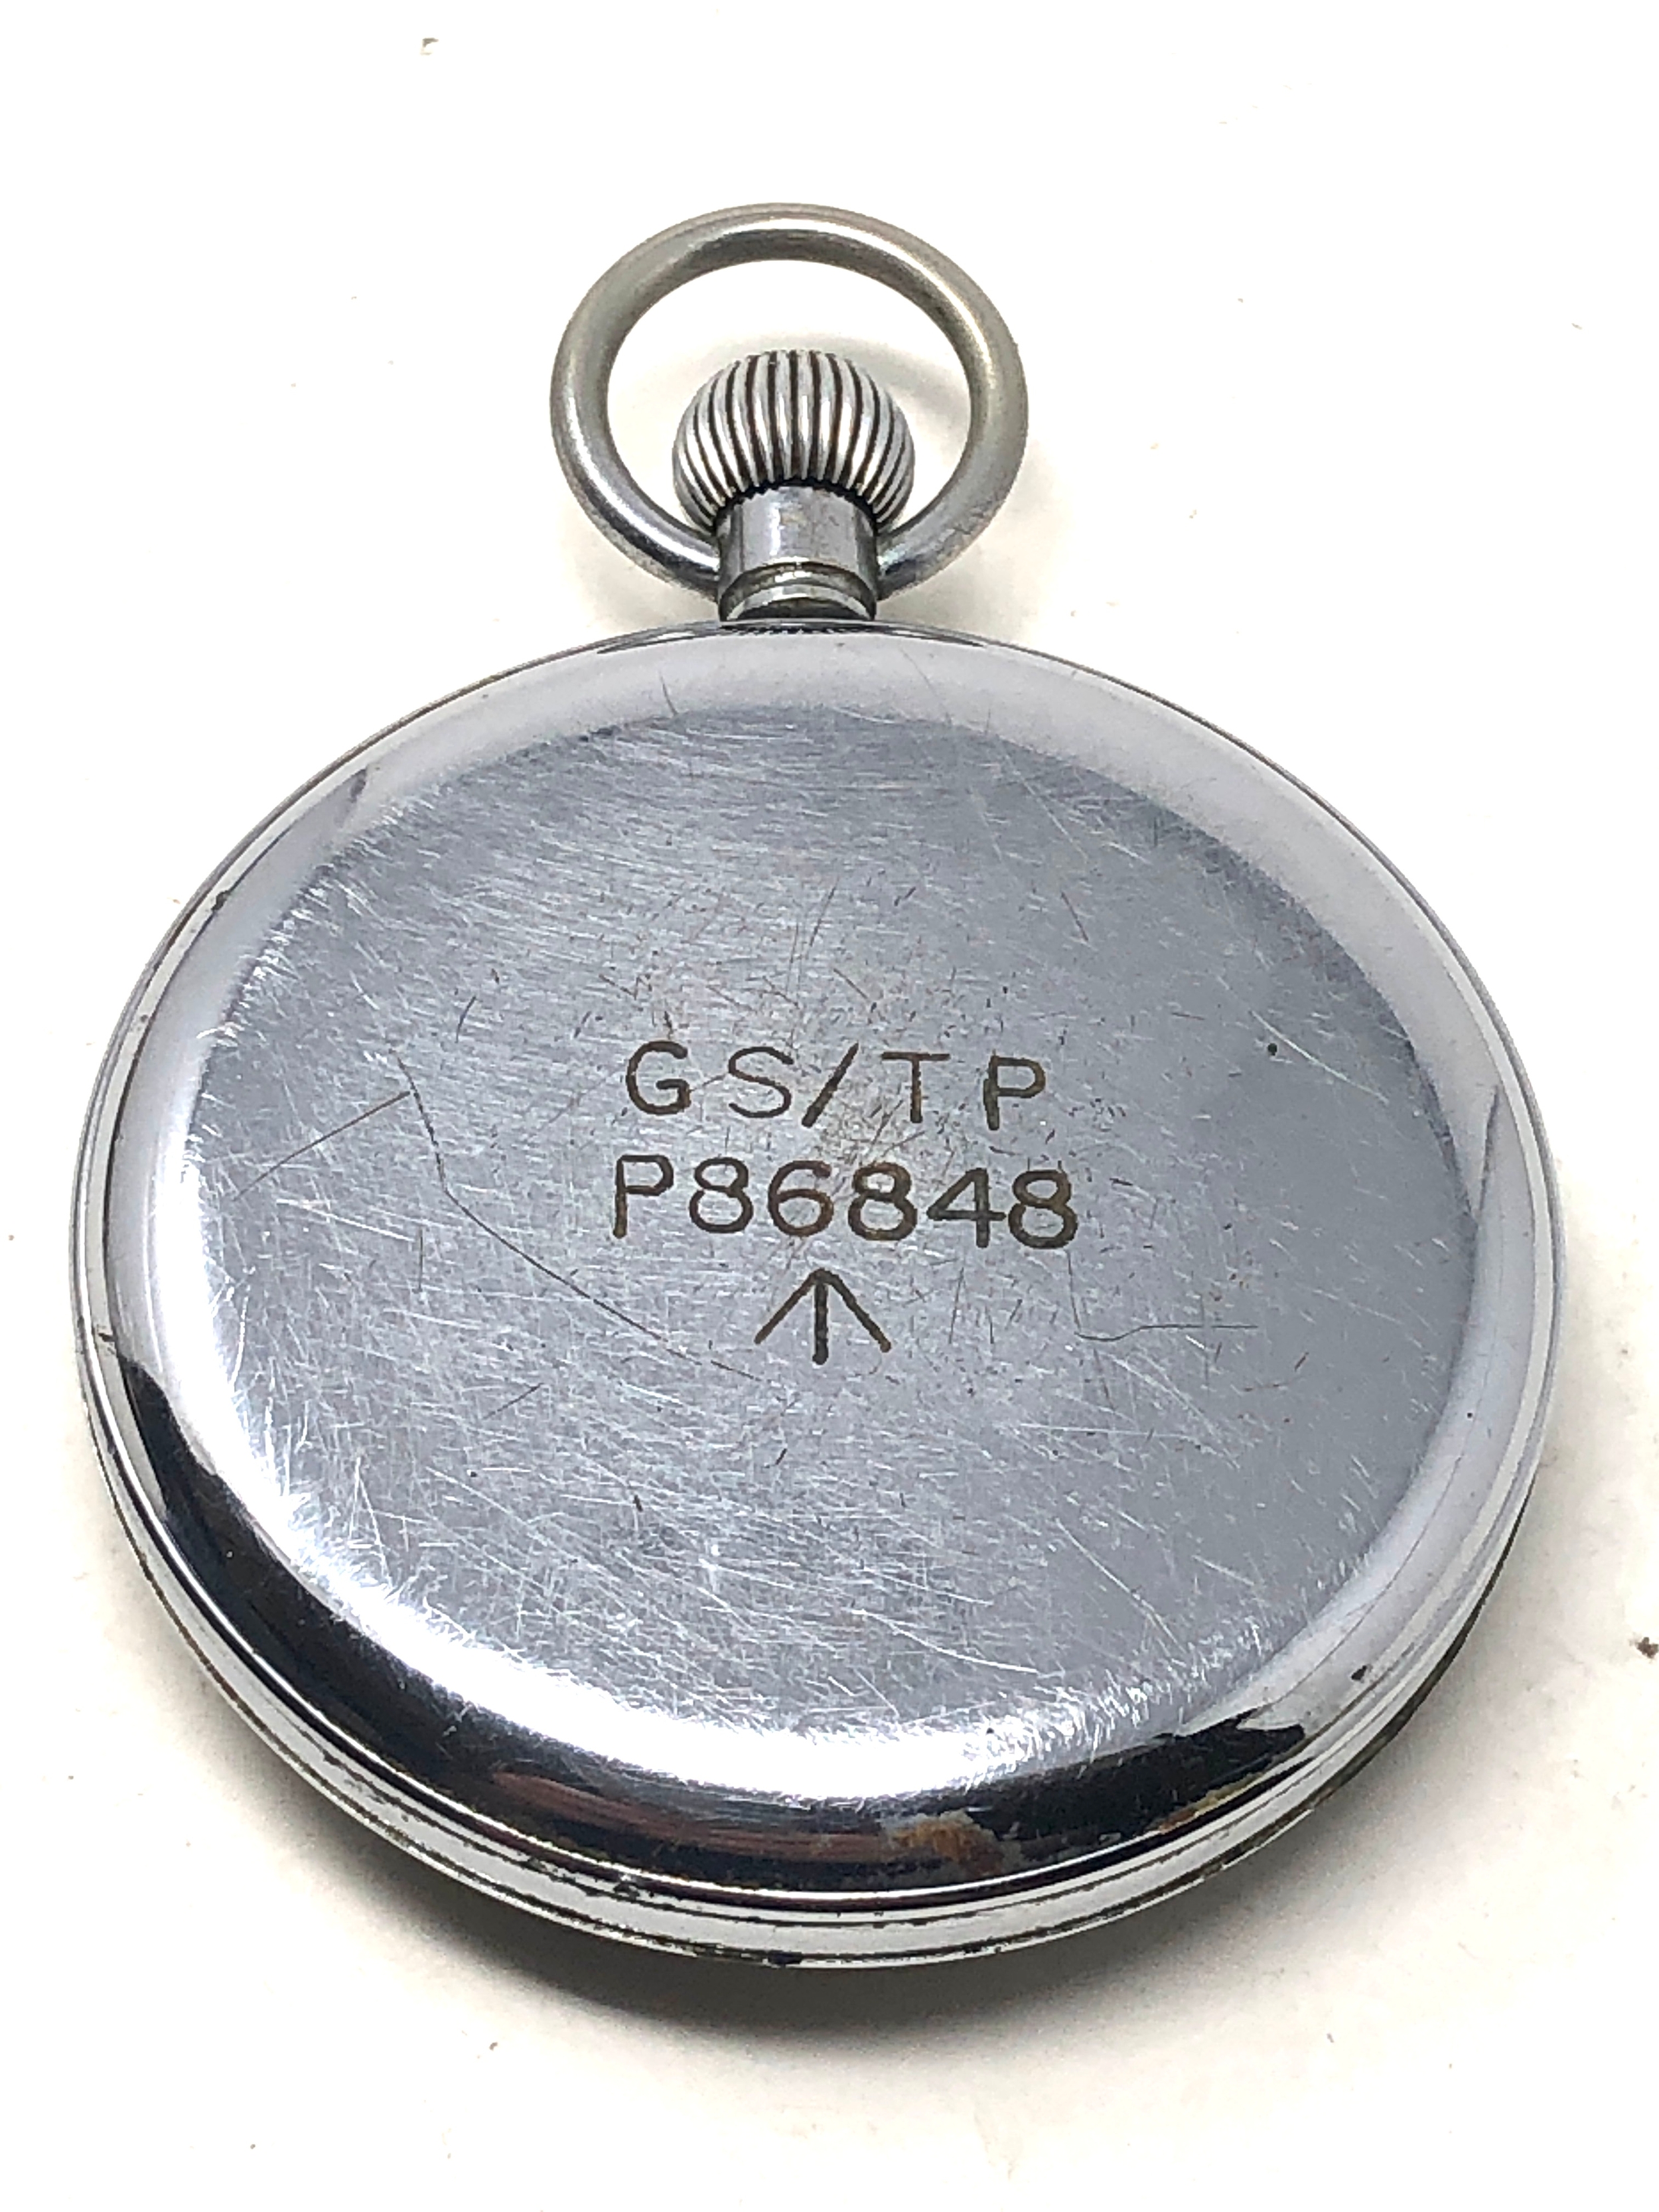 military ww2 pocket watch Helvetia the watch is ticking - Image 2 of 3